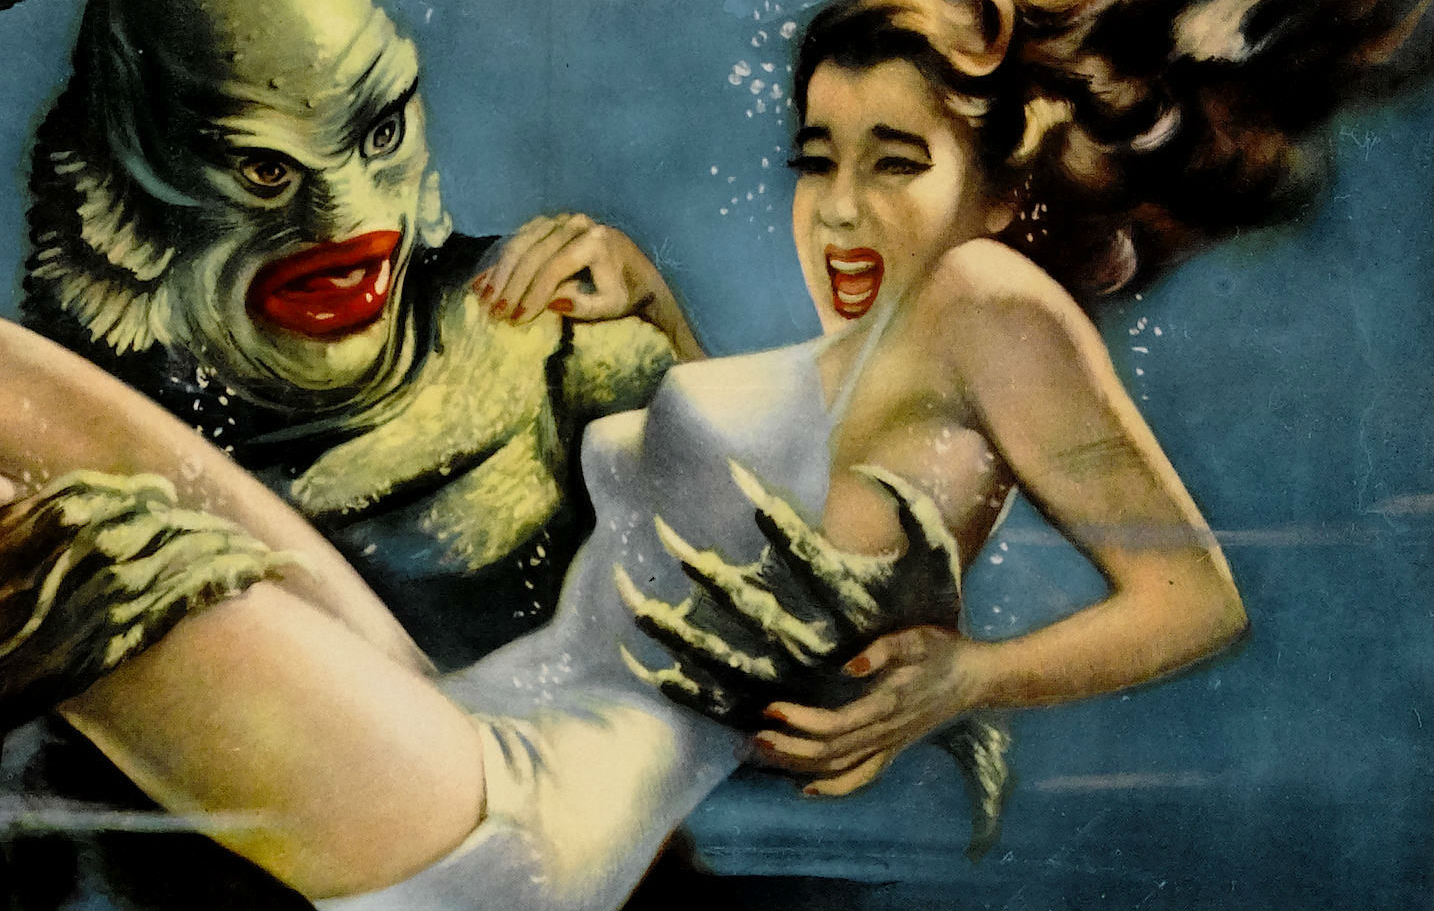 Monster movie posters reap scary-high prices